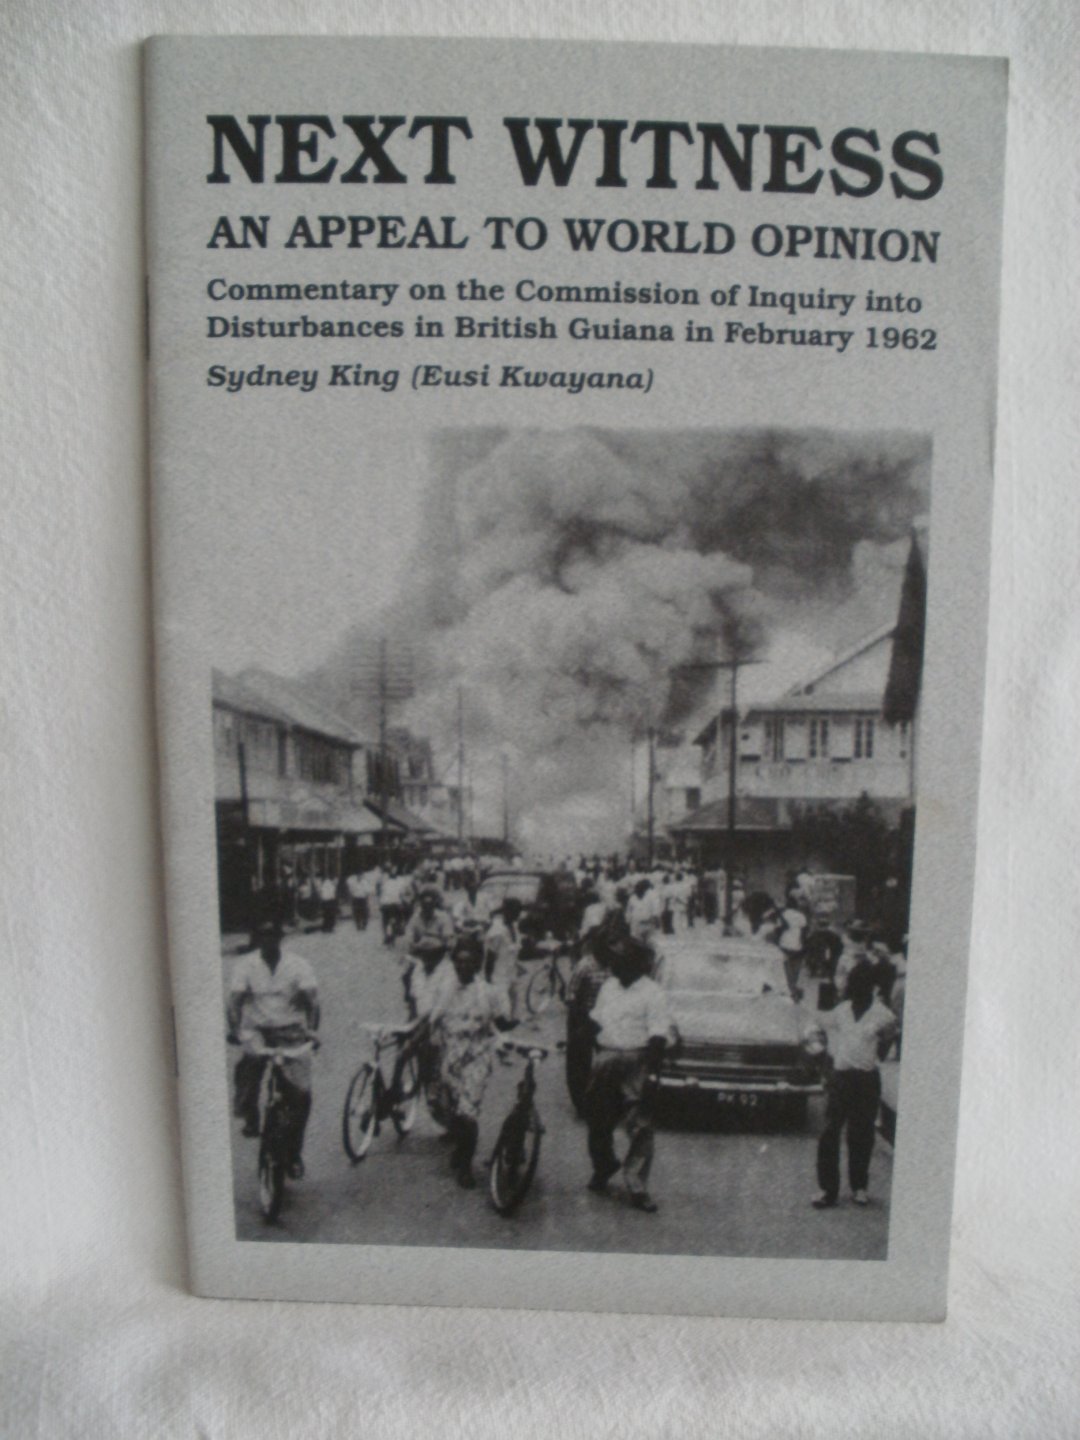 King, Sydney; Kwayana, Eusi (introduction) - Next Witness. An Appeal to World Opinion. Commentary on the Commission of Inquiry into Disturbances in British Guiana in February 1962